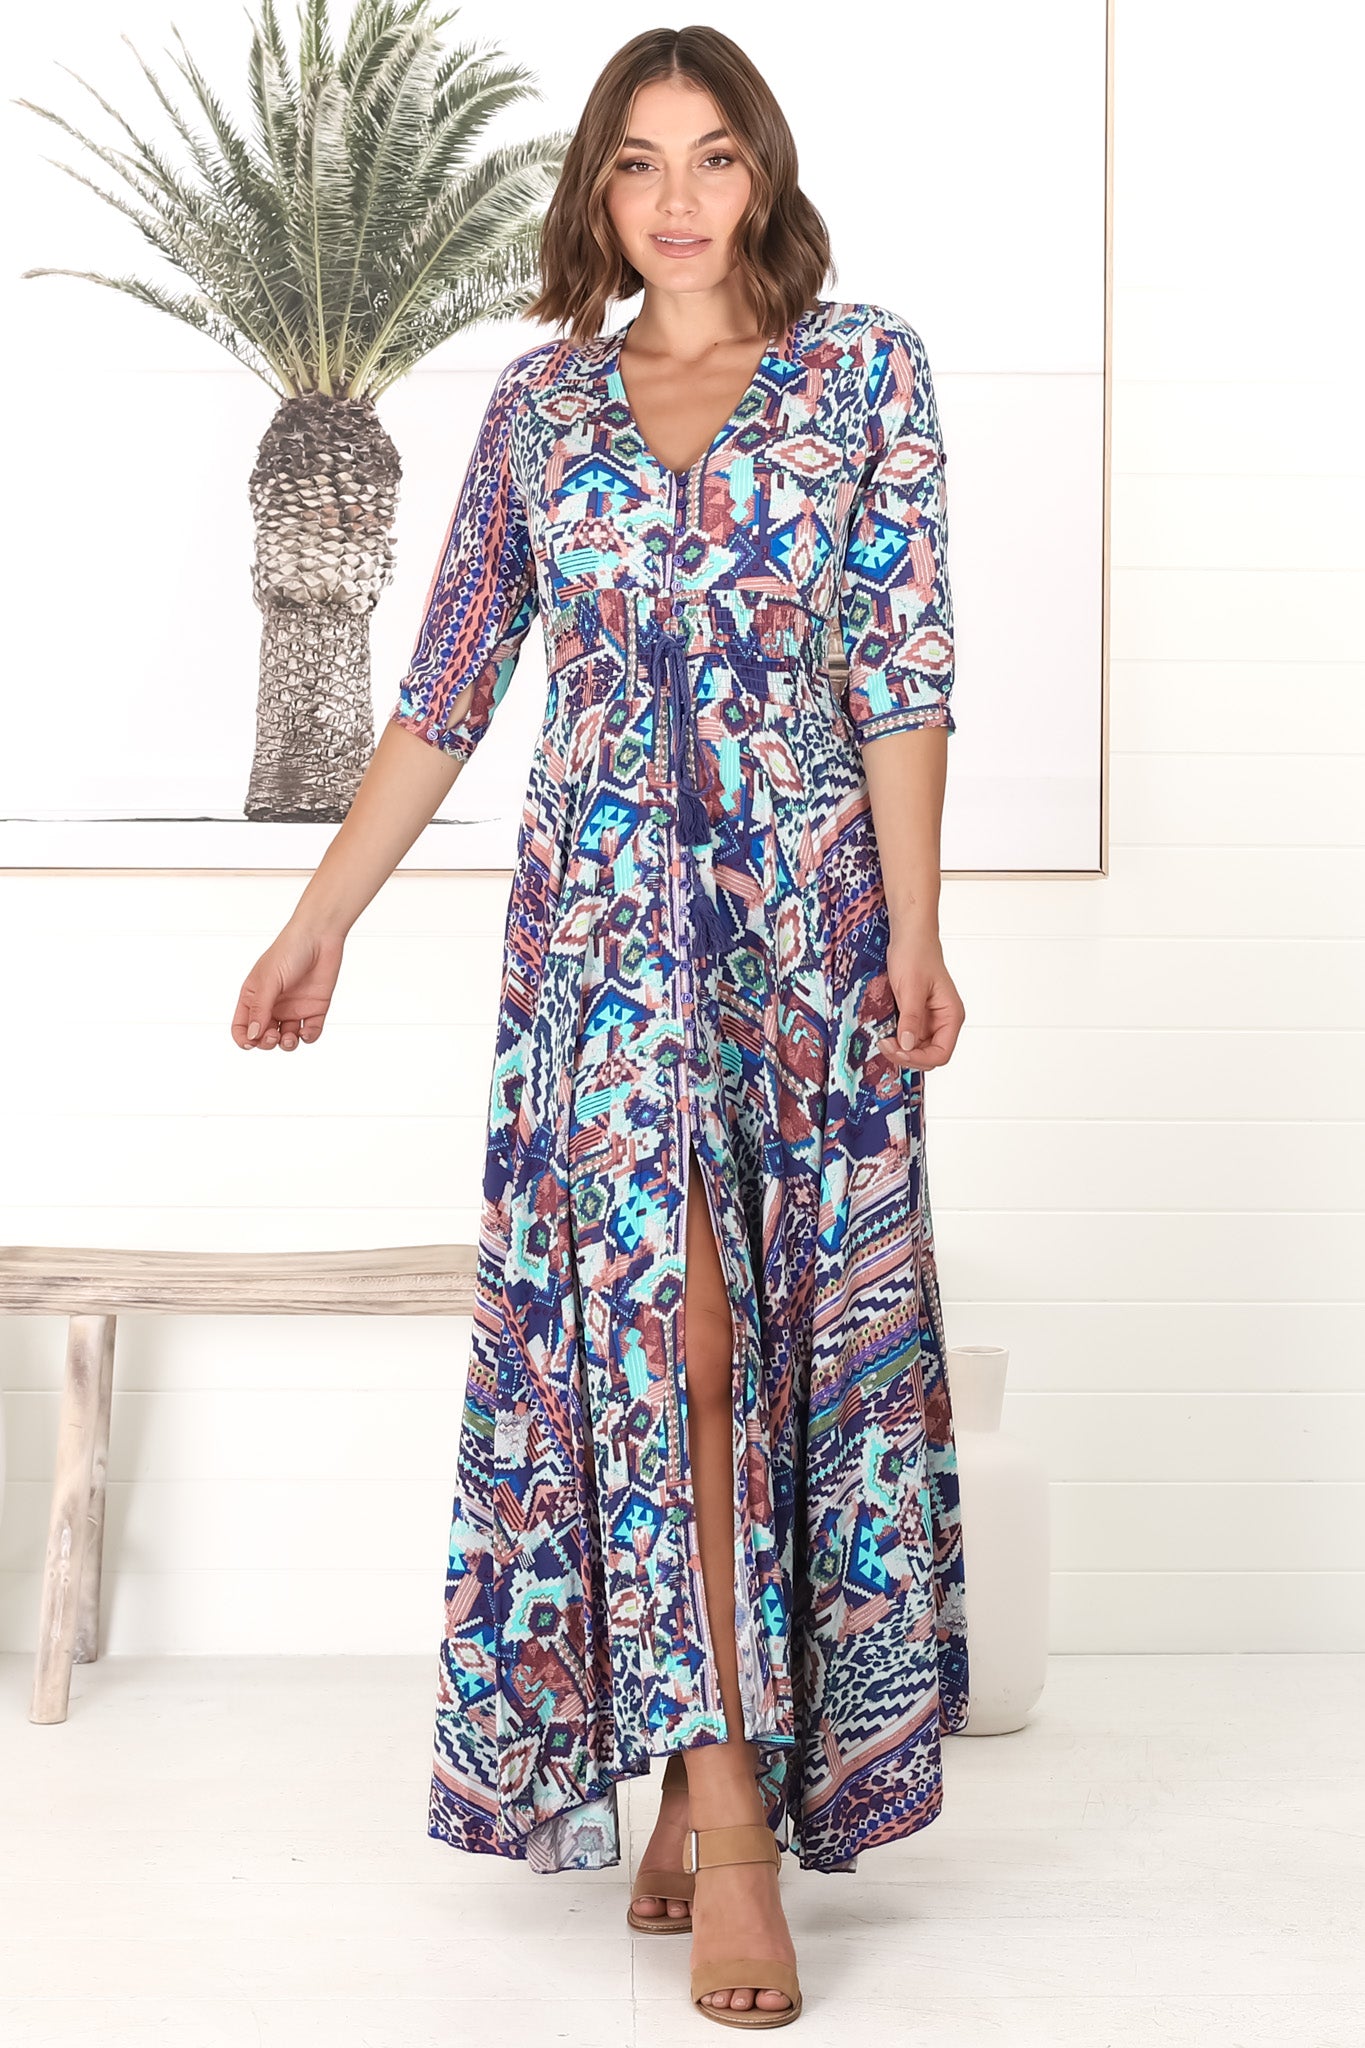 JAASE - Indiana Maxi Dress: Lace Back Shirred Waist A Line Dress with Handkercheif Hemline in Norah Print